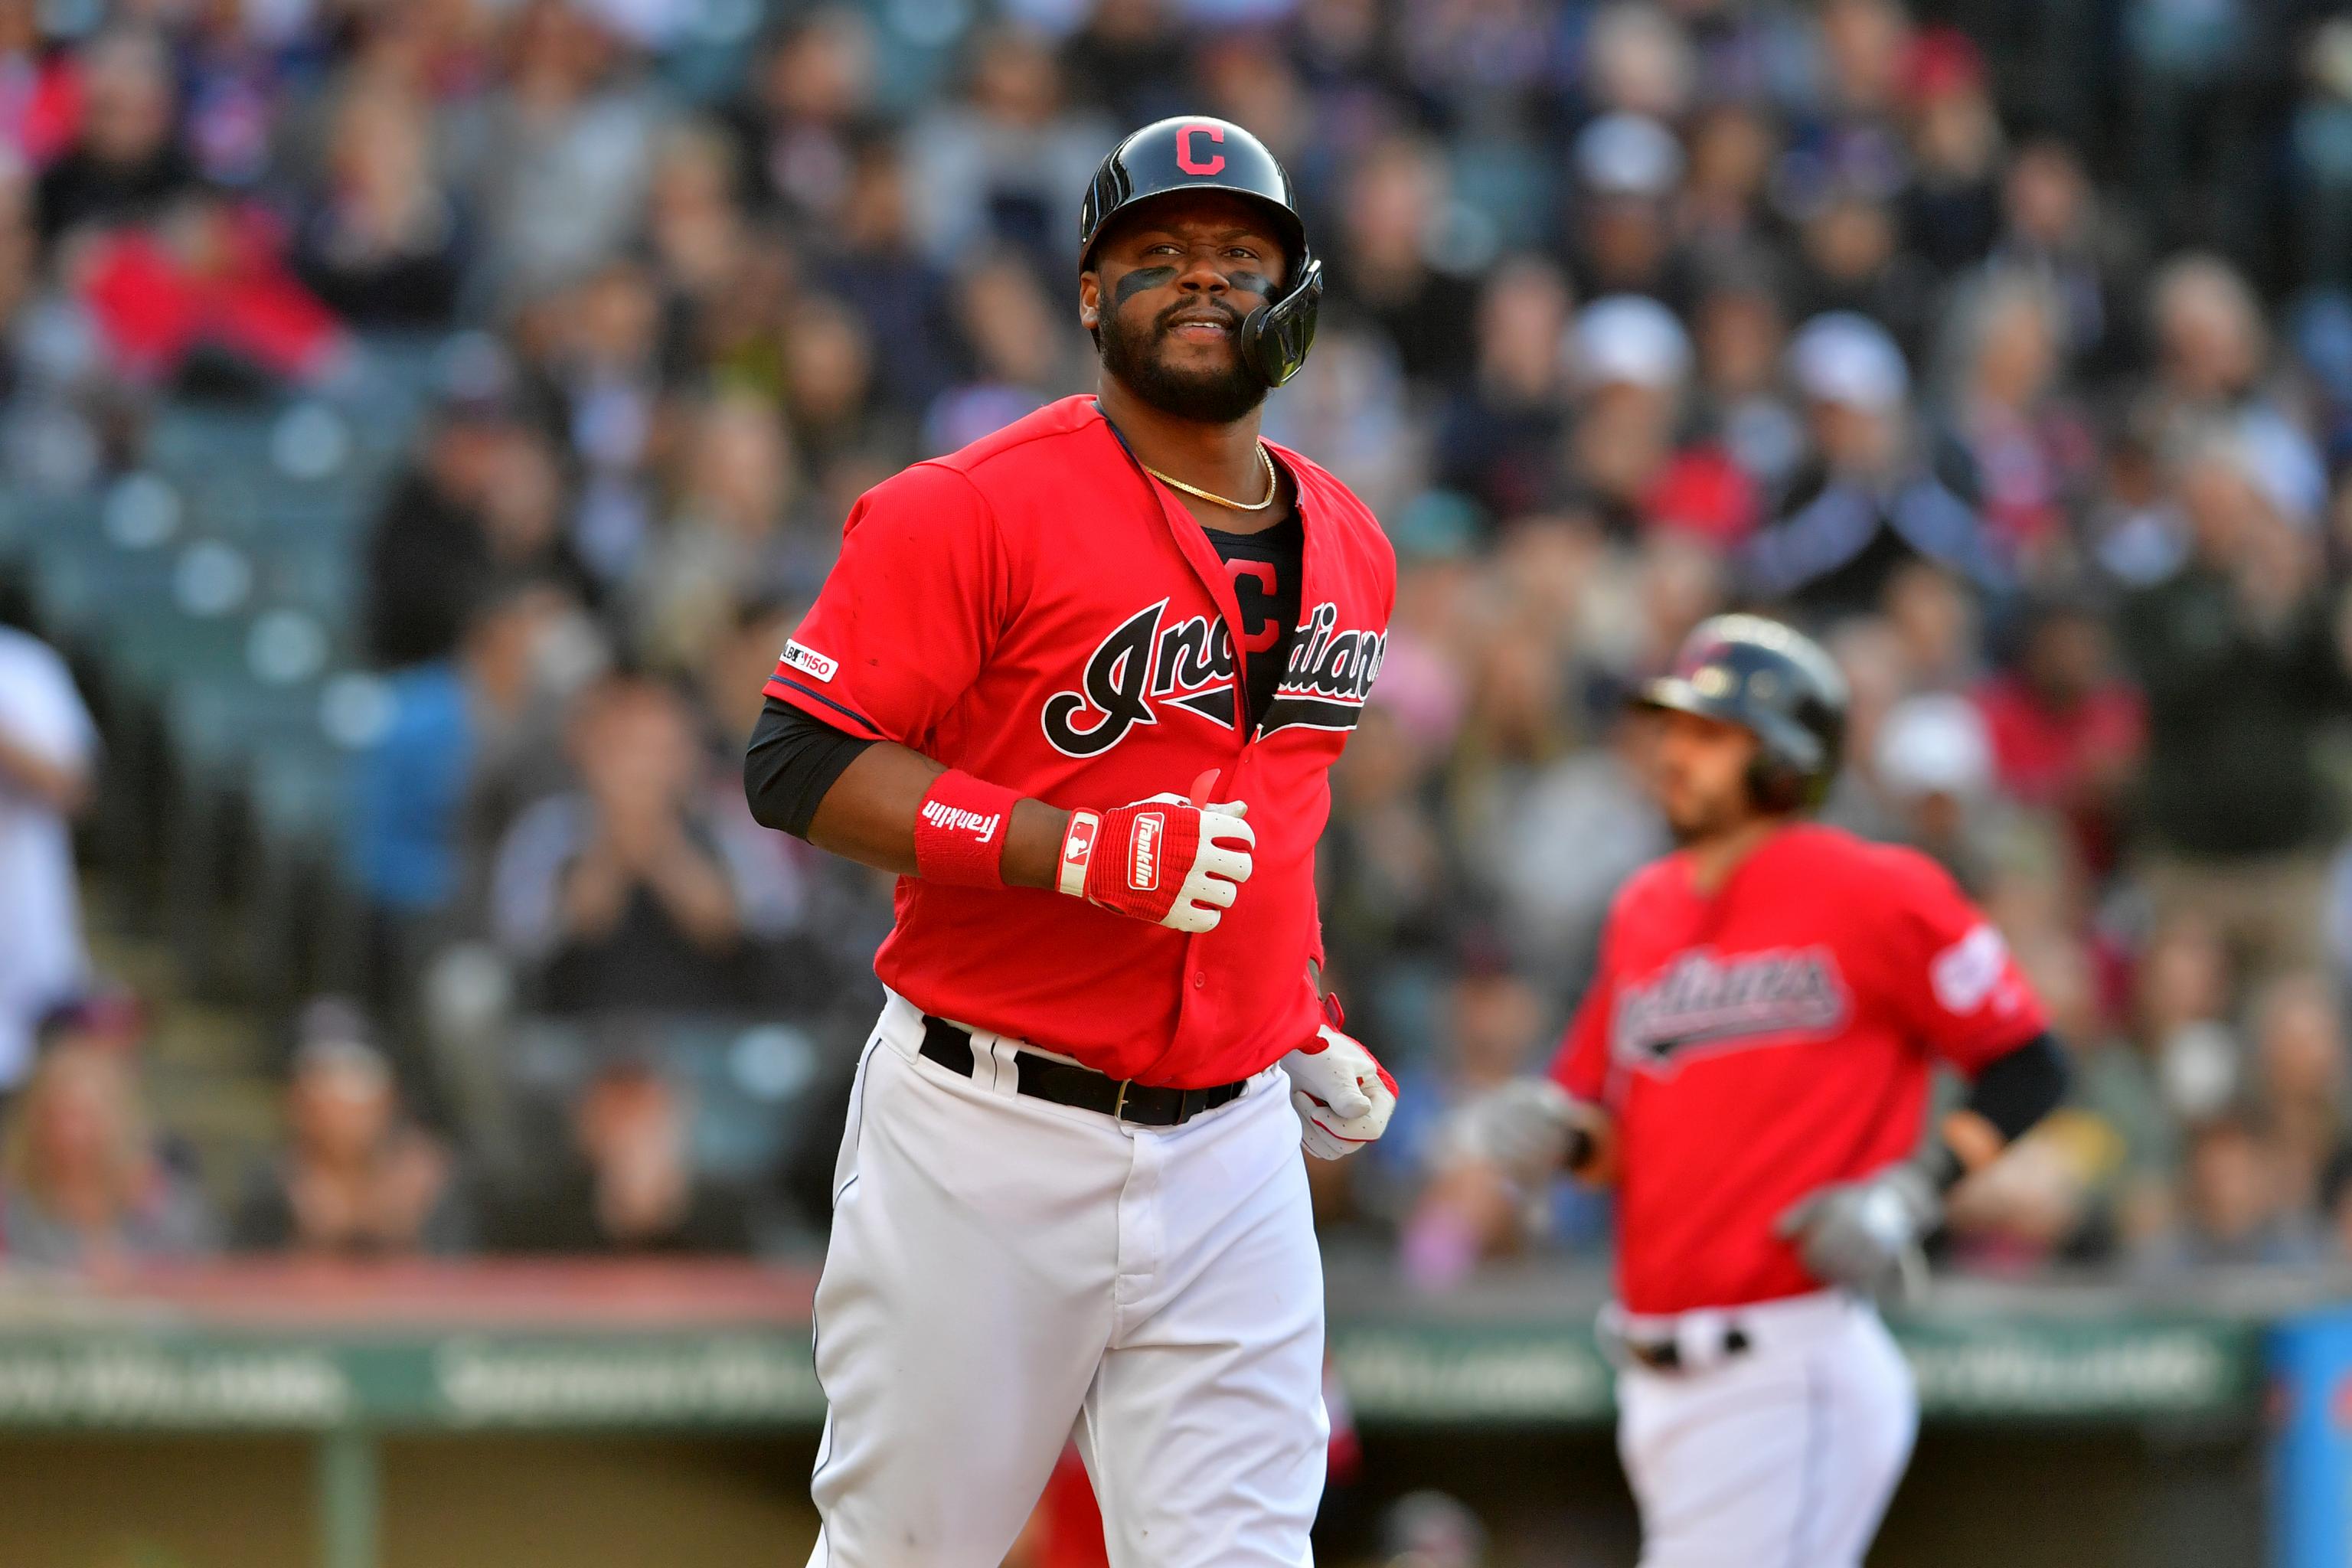 Former Boston Red Sox Hanley Ramirez signs with the Cleveland Indians